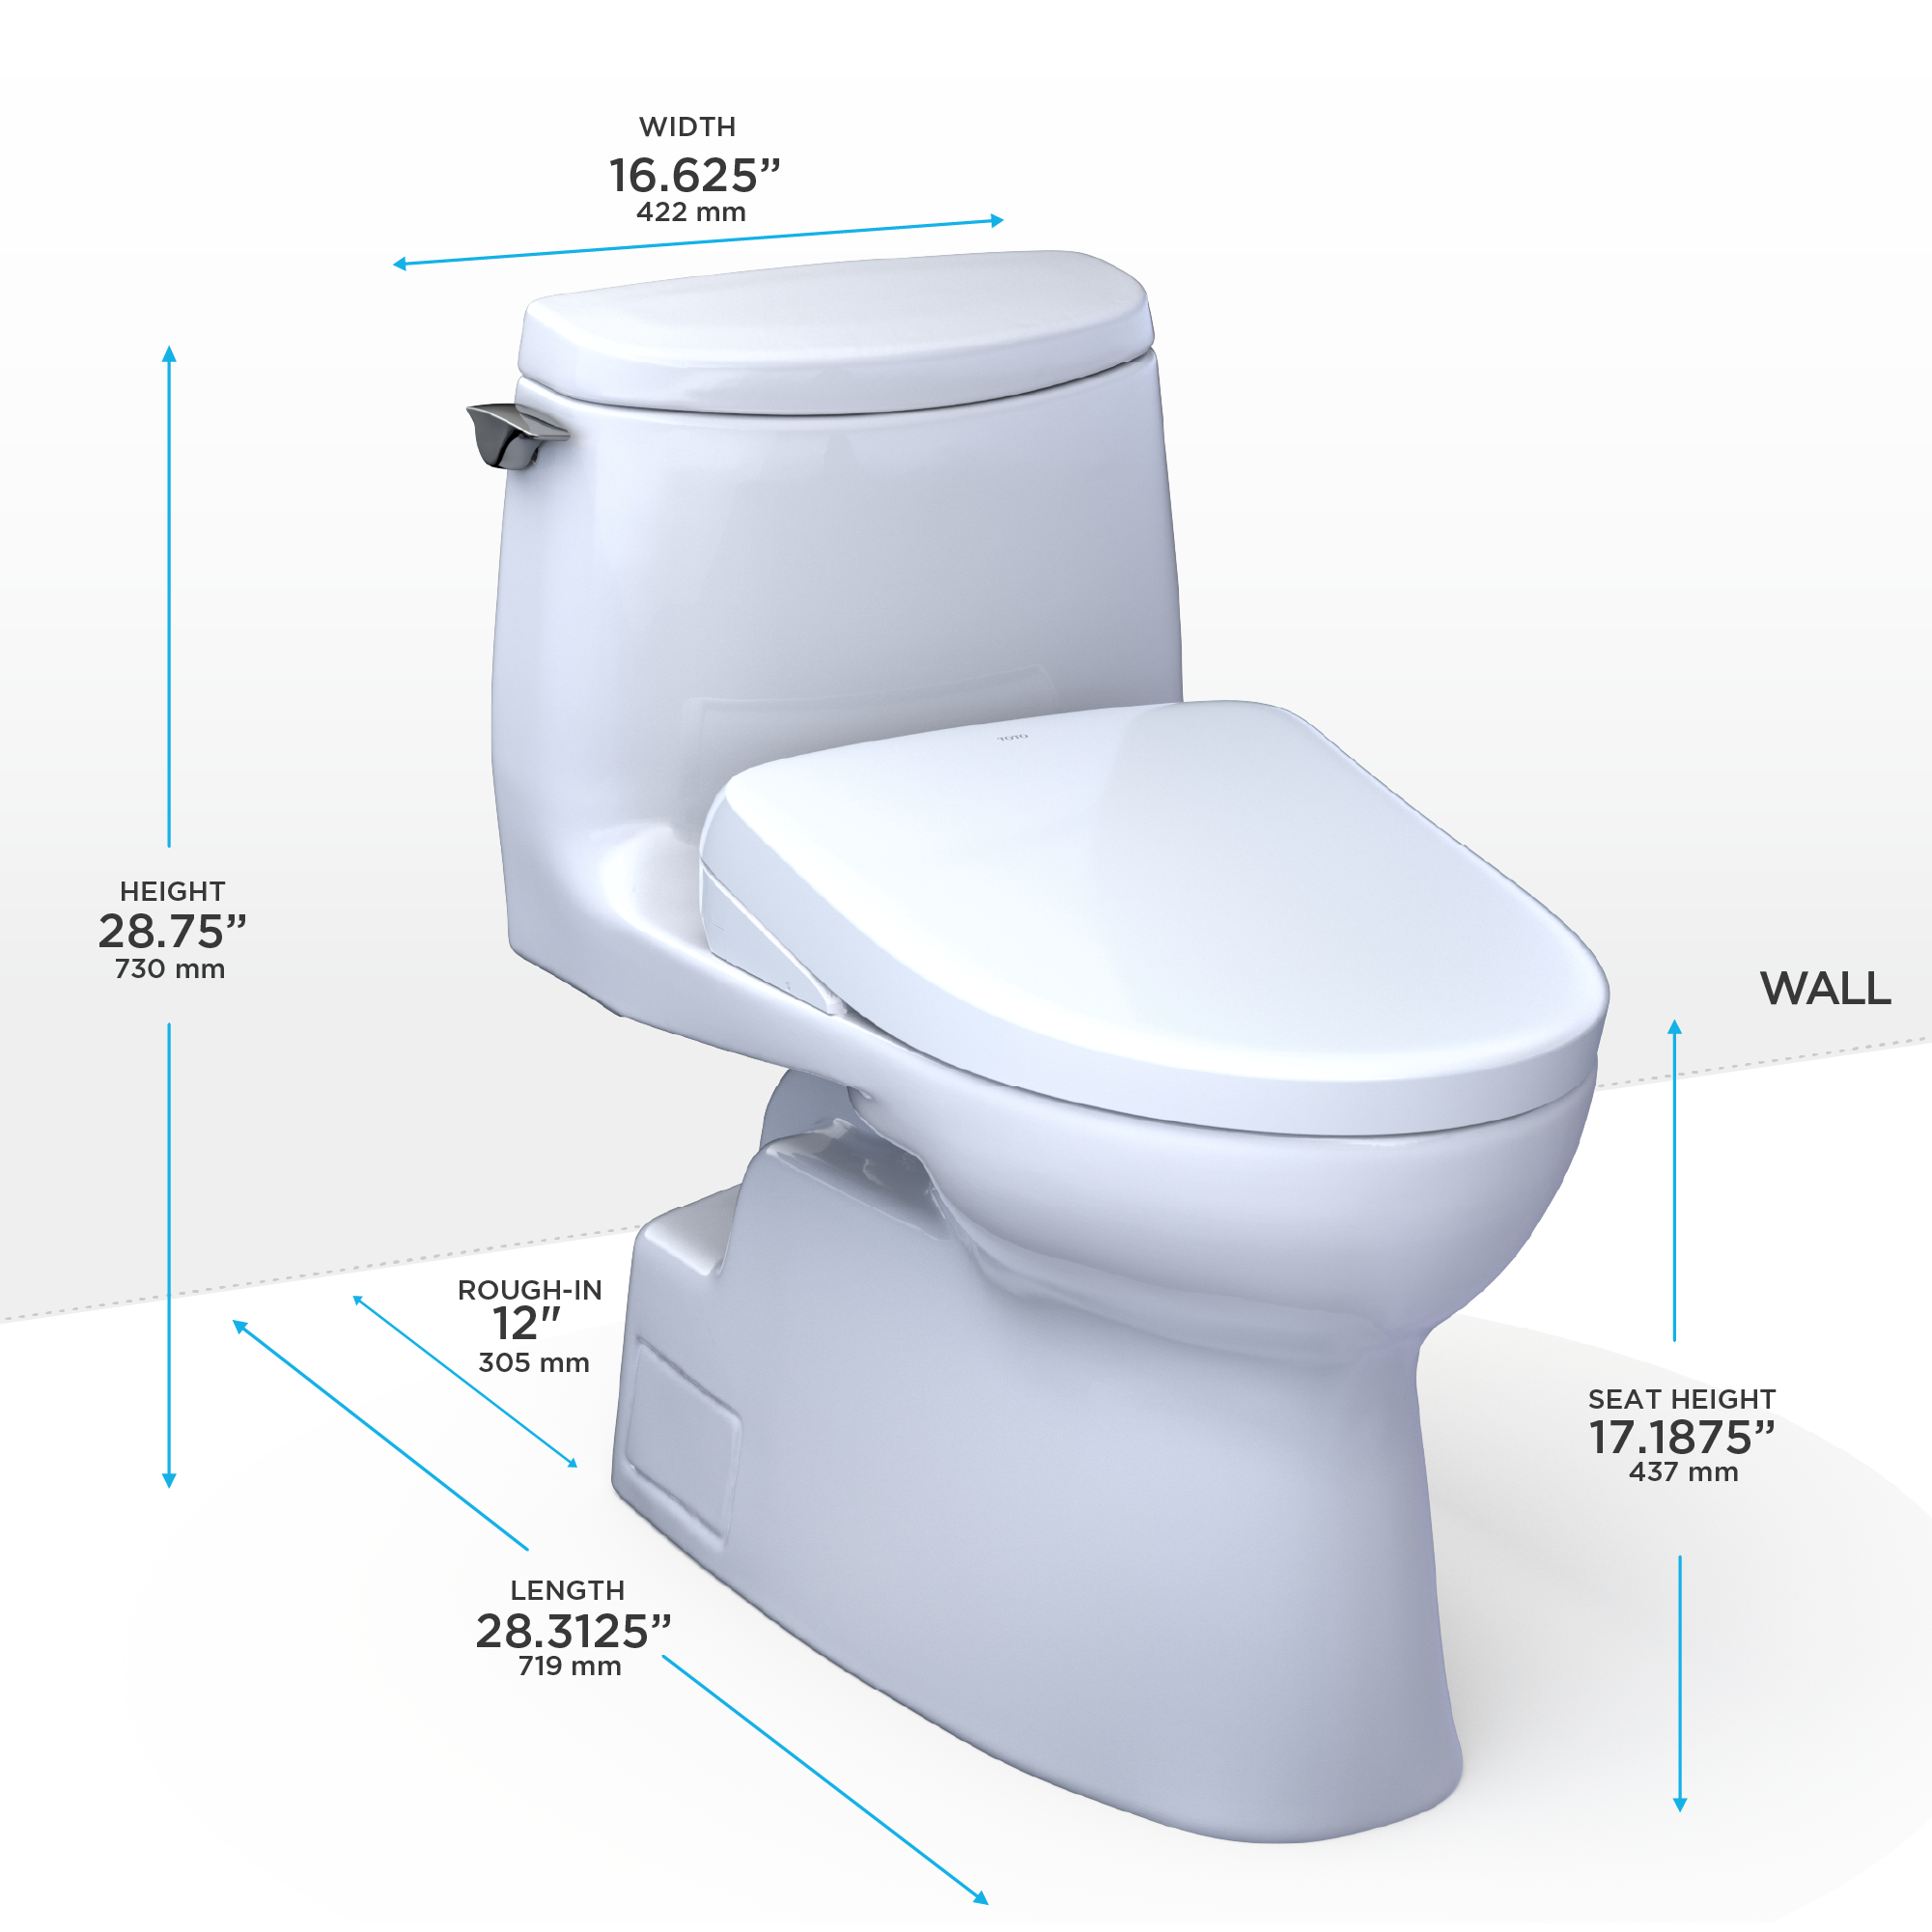 TOTO WASHLET+ Carlyle II 1G One-Piece Elongated 1.0 GPF Toilet and WASHLET+ S7A Contemporary Bidet Seat, Cotton White - MW6144736CUFG#01, MW6144736CUFGA#01